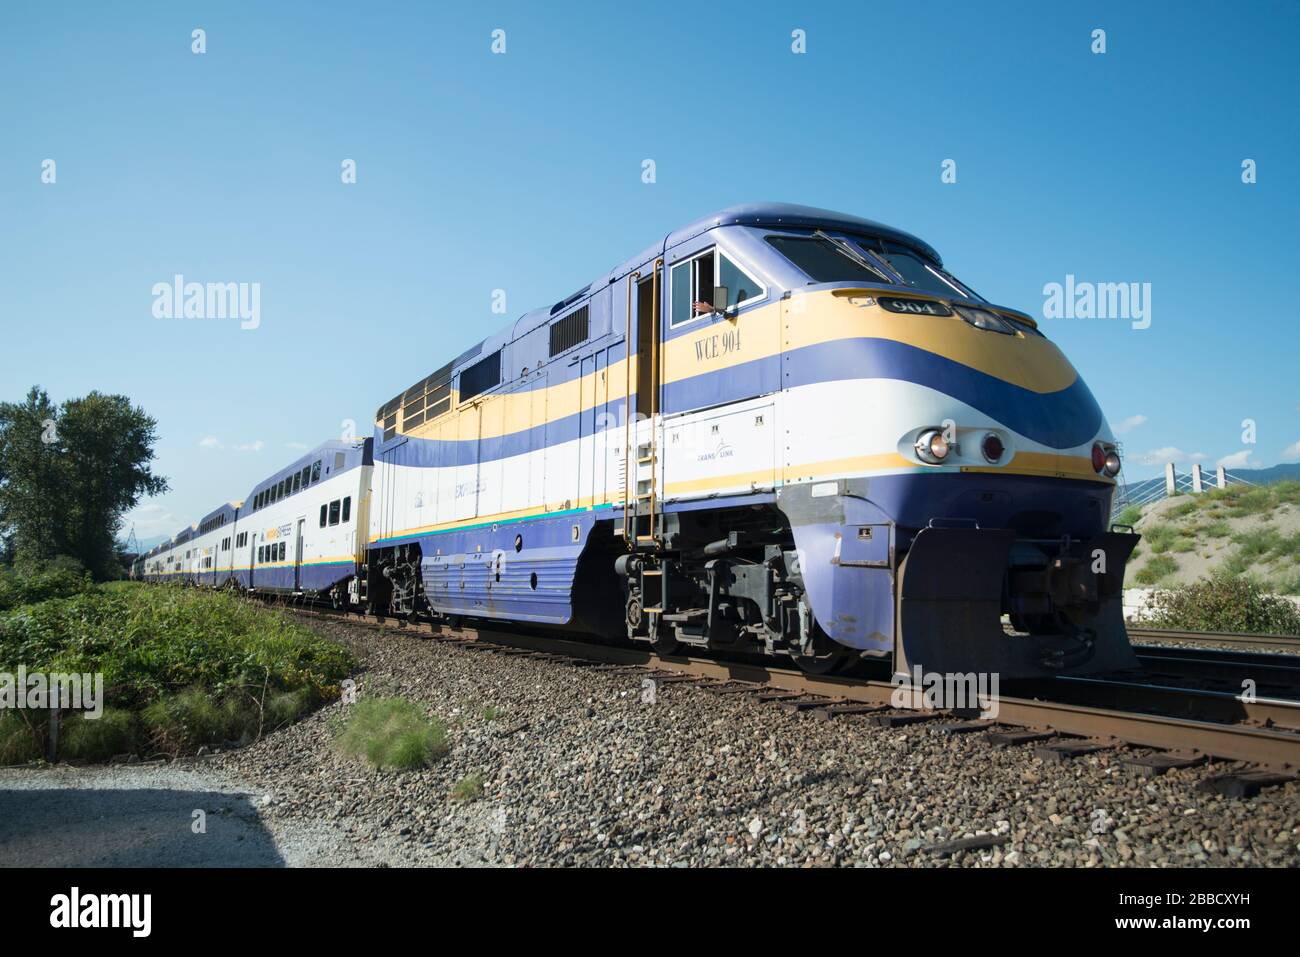 The Westcoast Express commuter train in Pitt Meadows, British Columbia, Canada Stock Photo